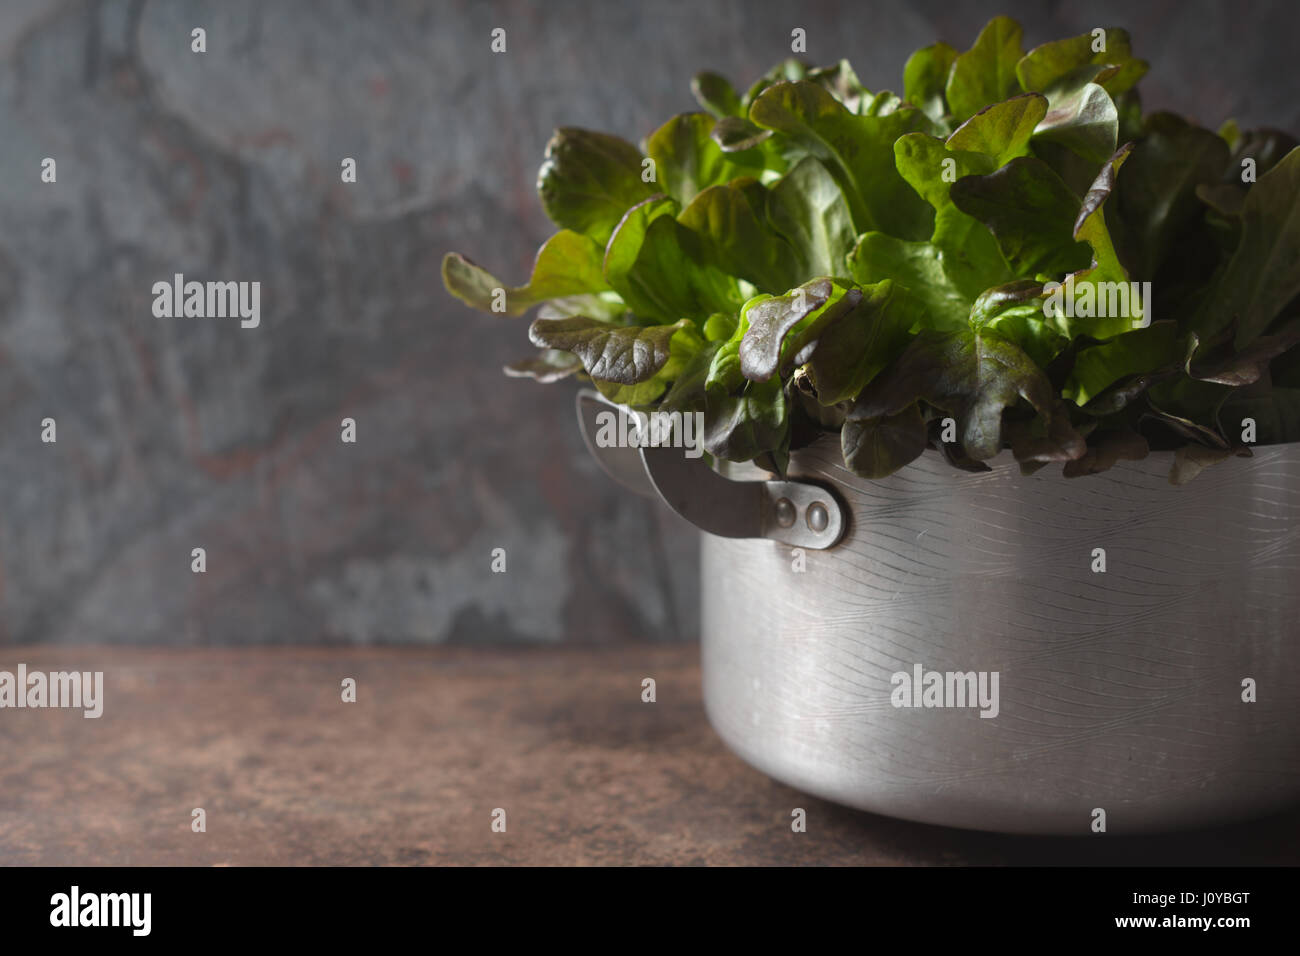 Leaves of salad in the metal pot horizontal Stock Photo